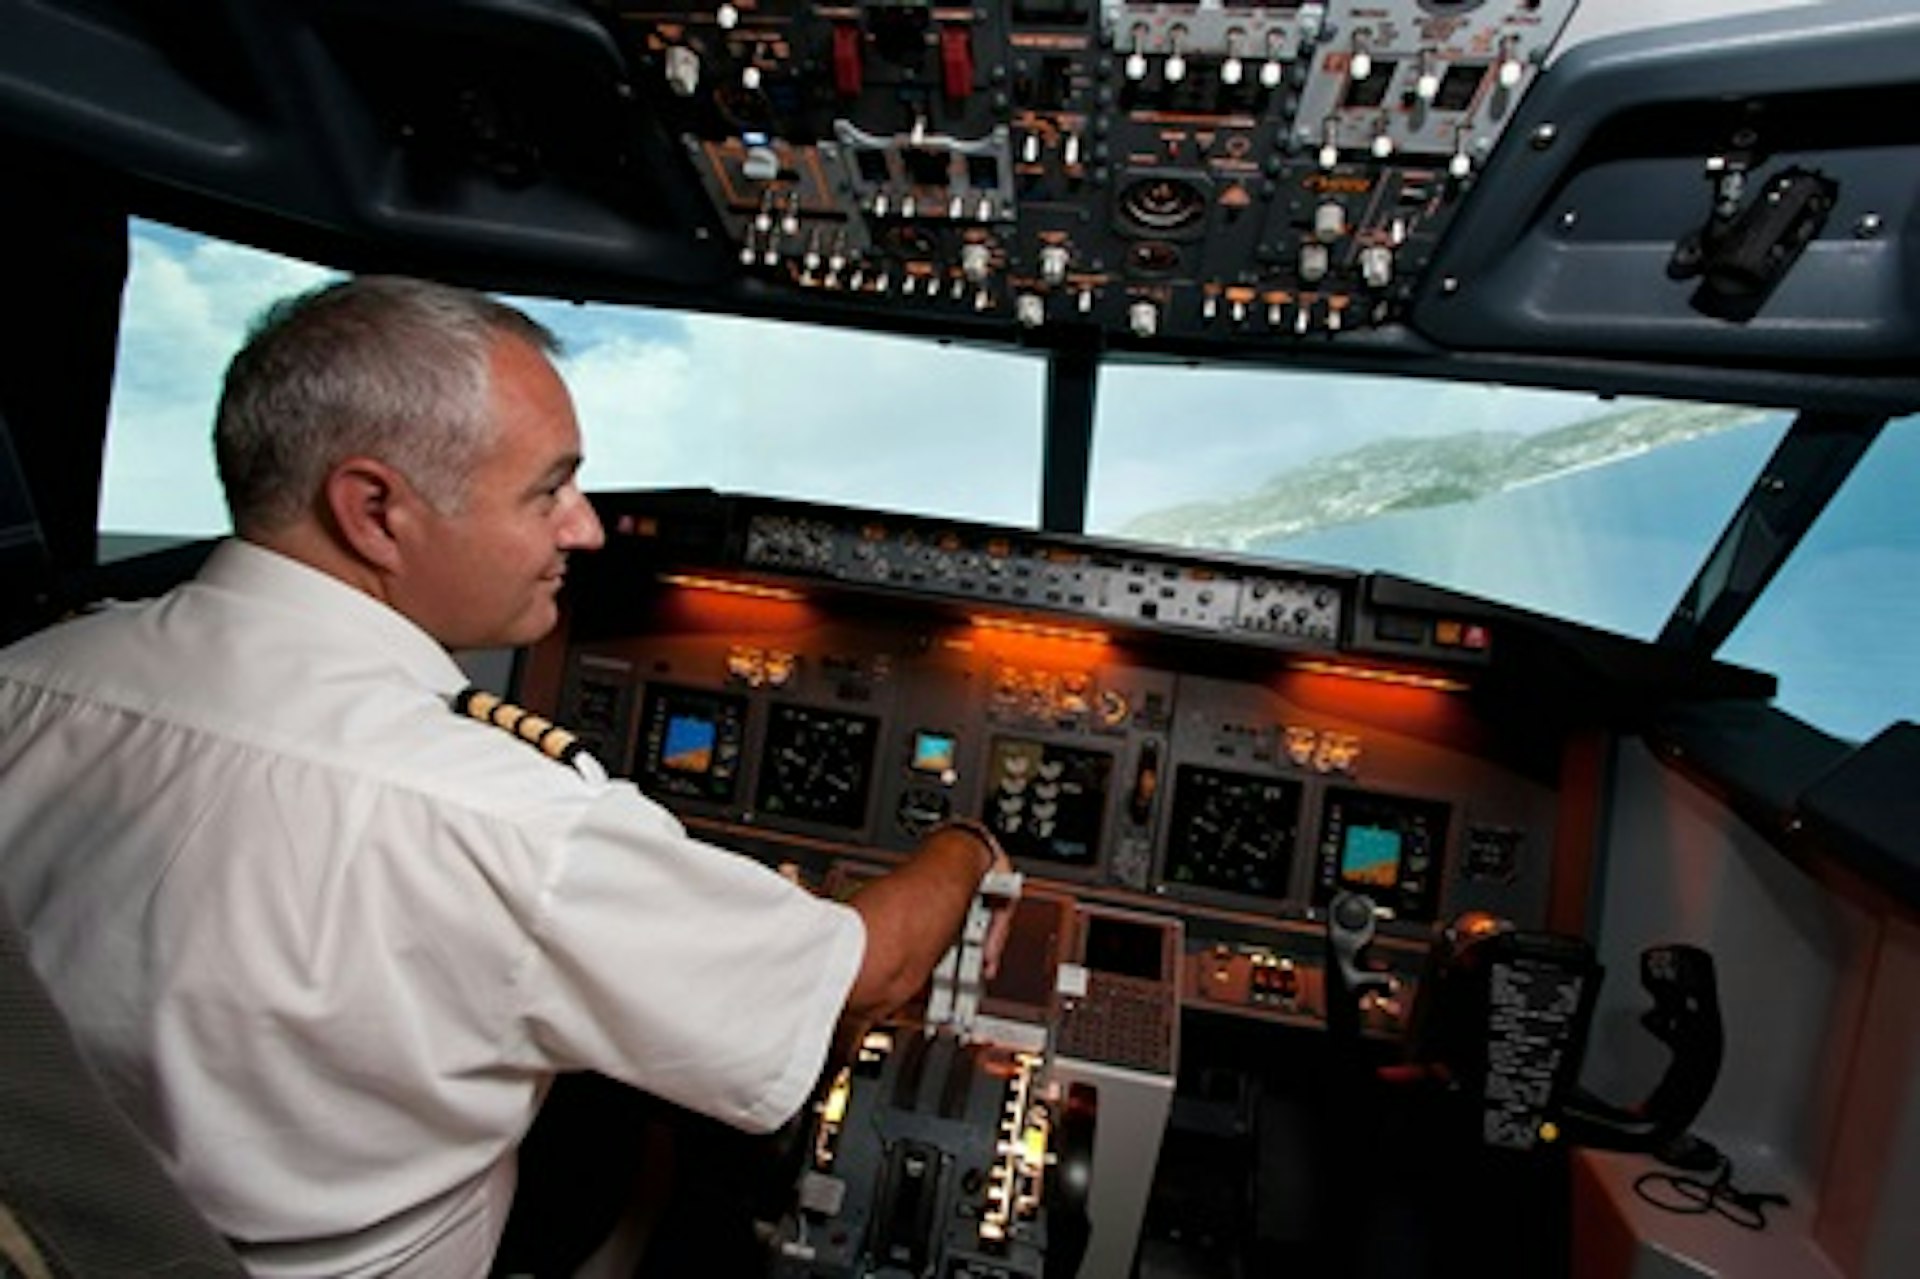 Flight Simulator Experience Aboard a Boeing 737 - 30 minutes 2